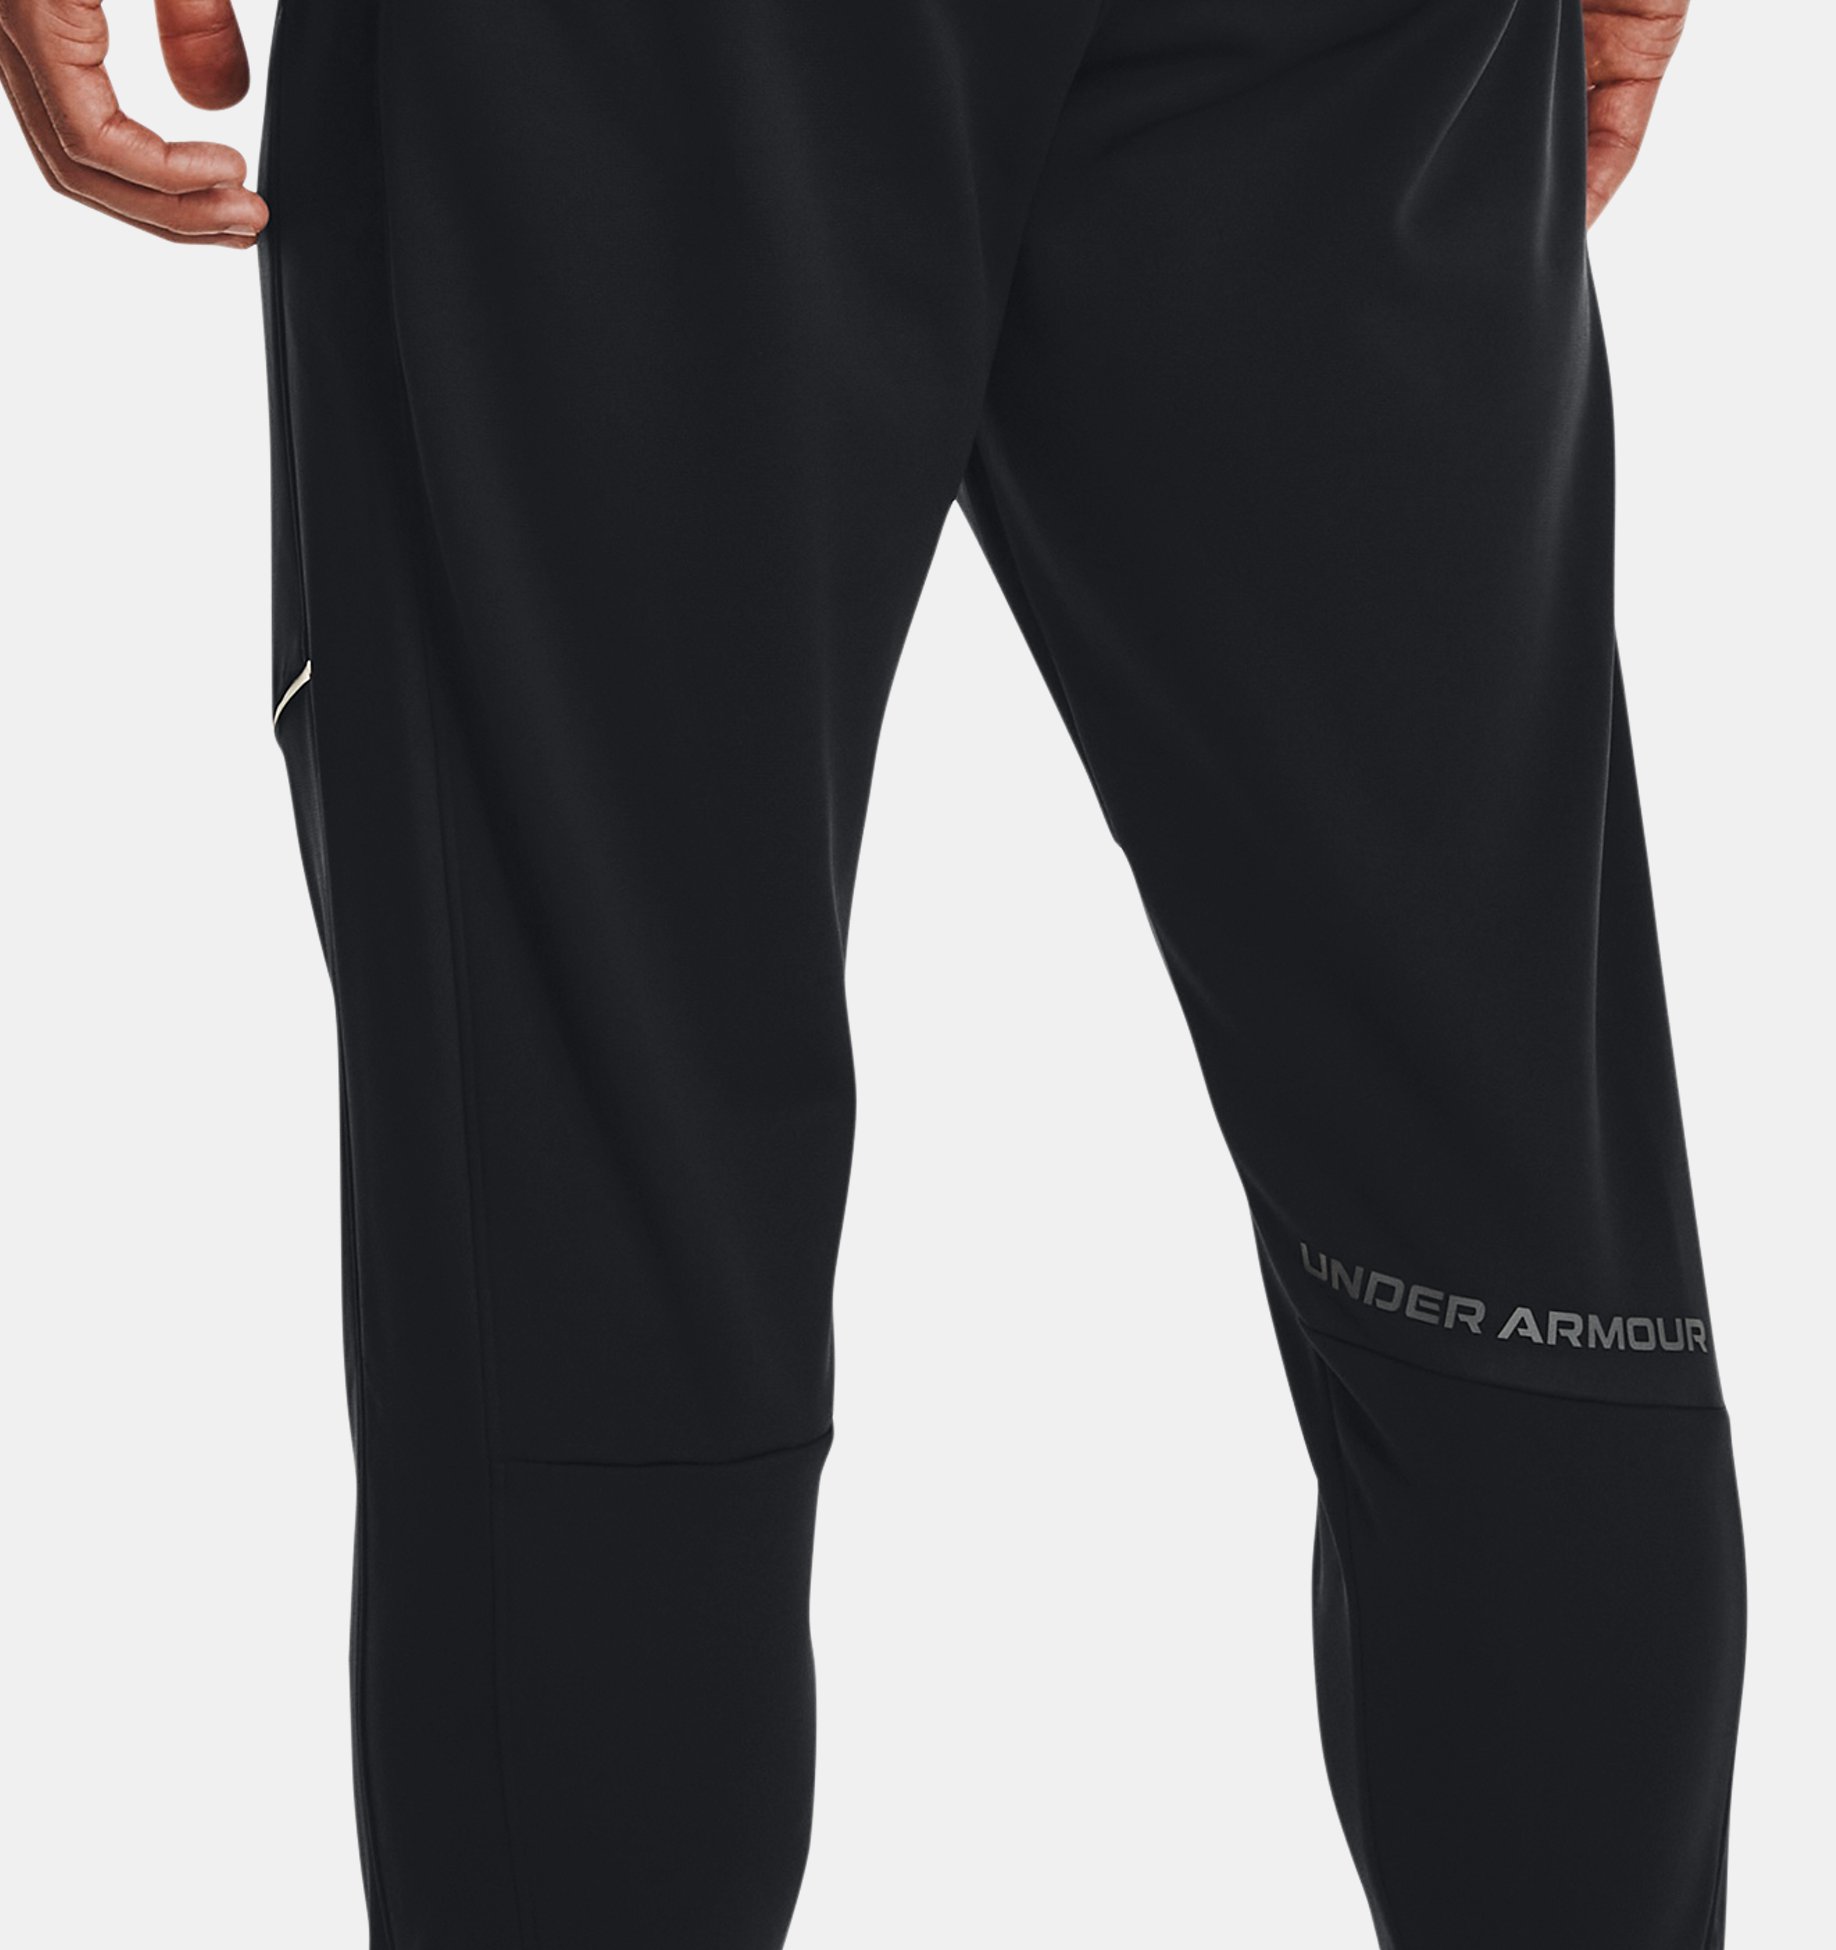 https://underarmour.scene7.com/is/image/Underarmour/V5-1373784-001_BC?rp=standard-0pad|pdpZoomDesktop&scl=0.72&fmt=jpg&qlt=85&resMode=sharp2&cache=on,on&bgc=f0f0f0&wid=1836&hei=1950&size=1500,1500